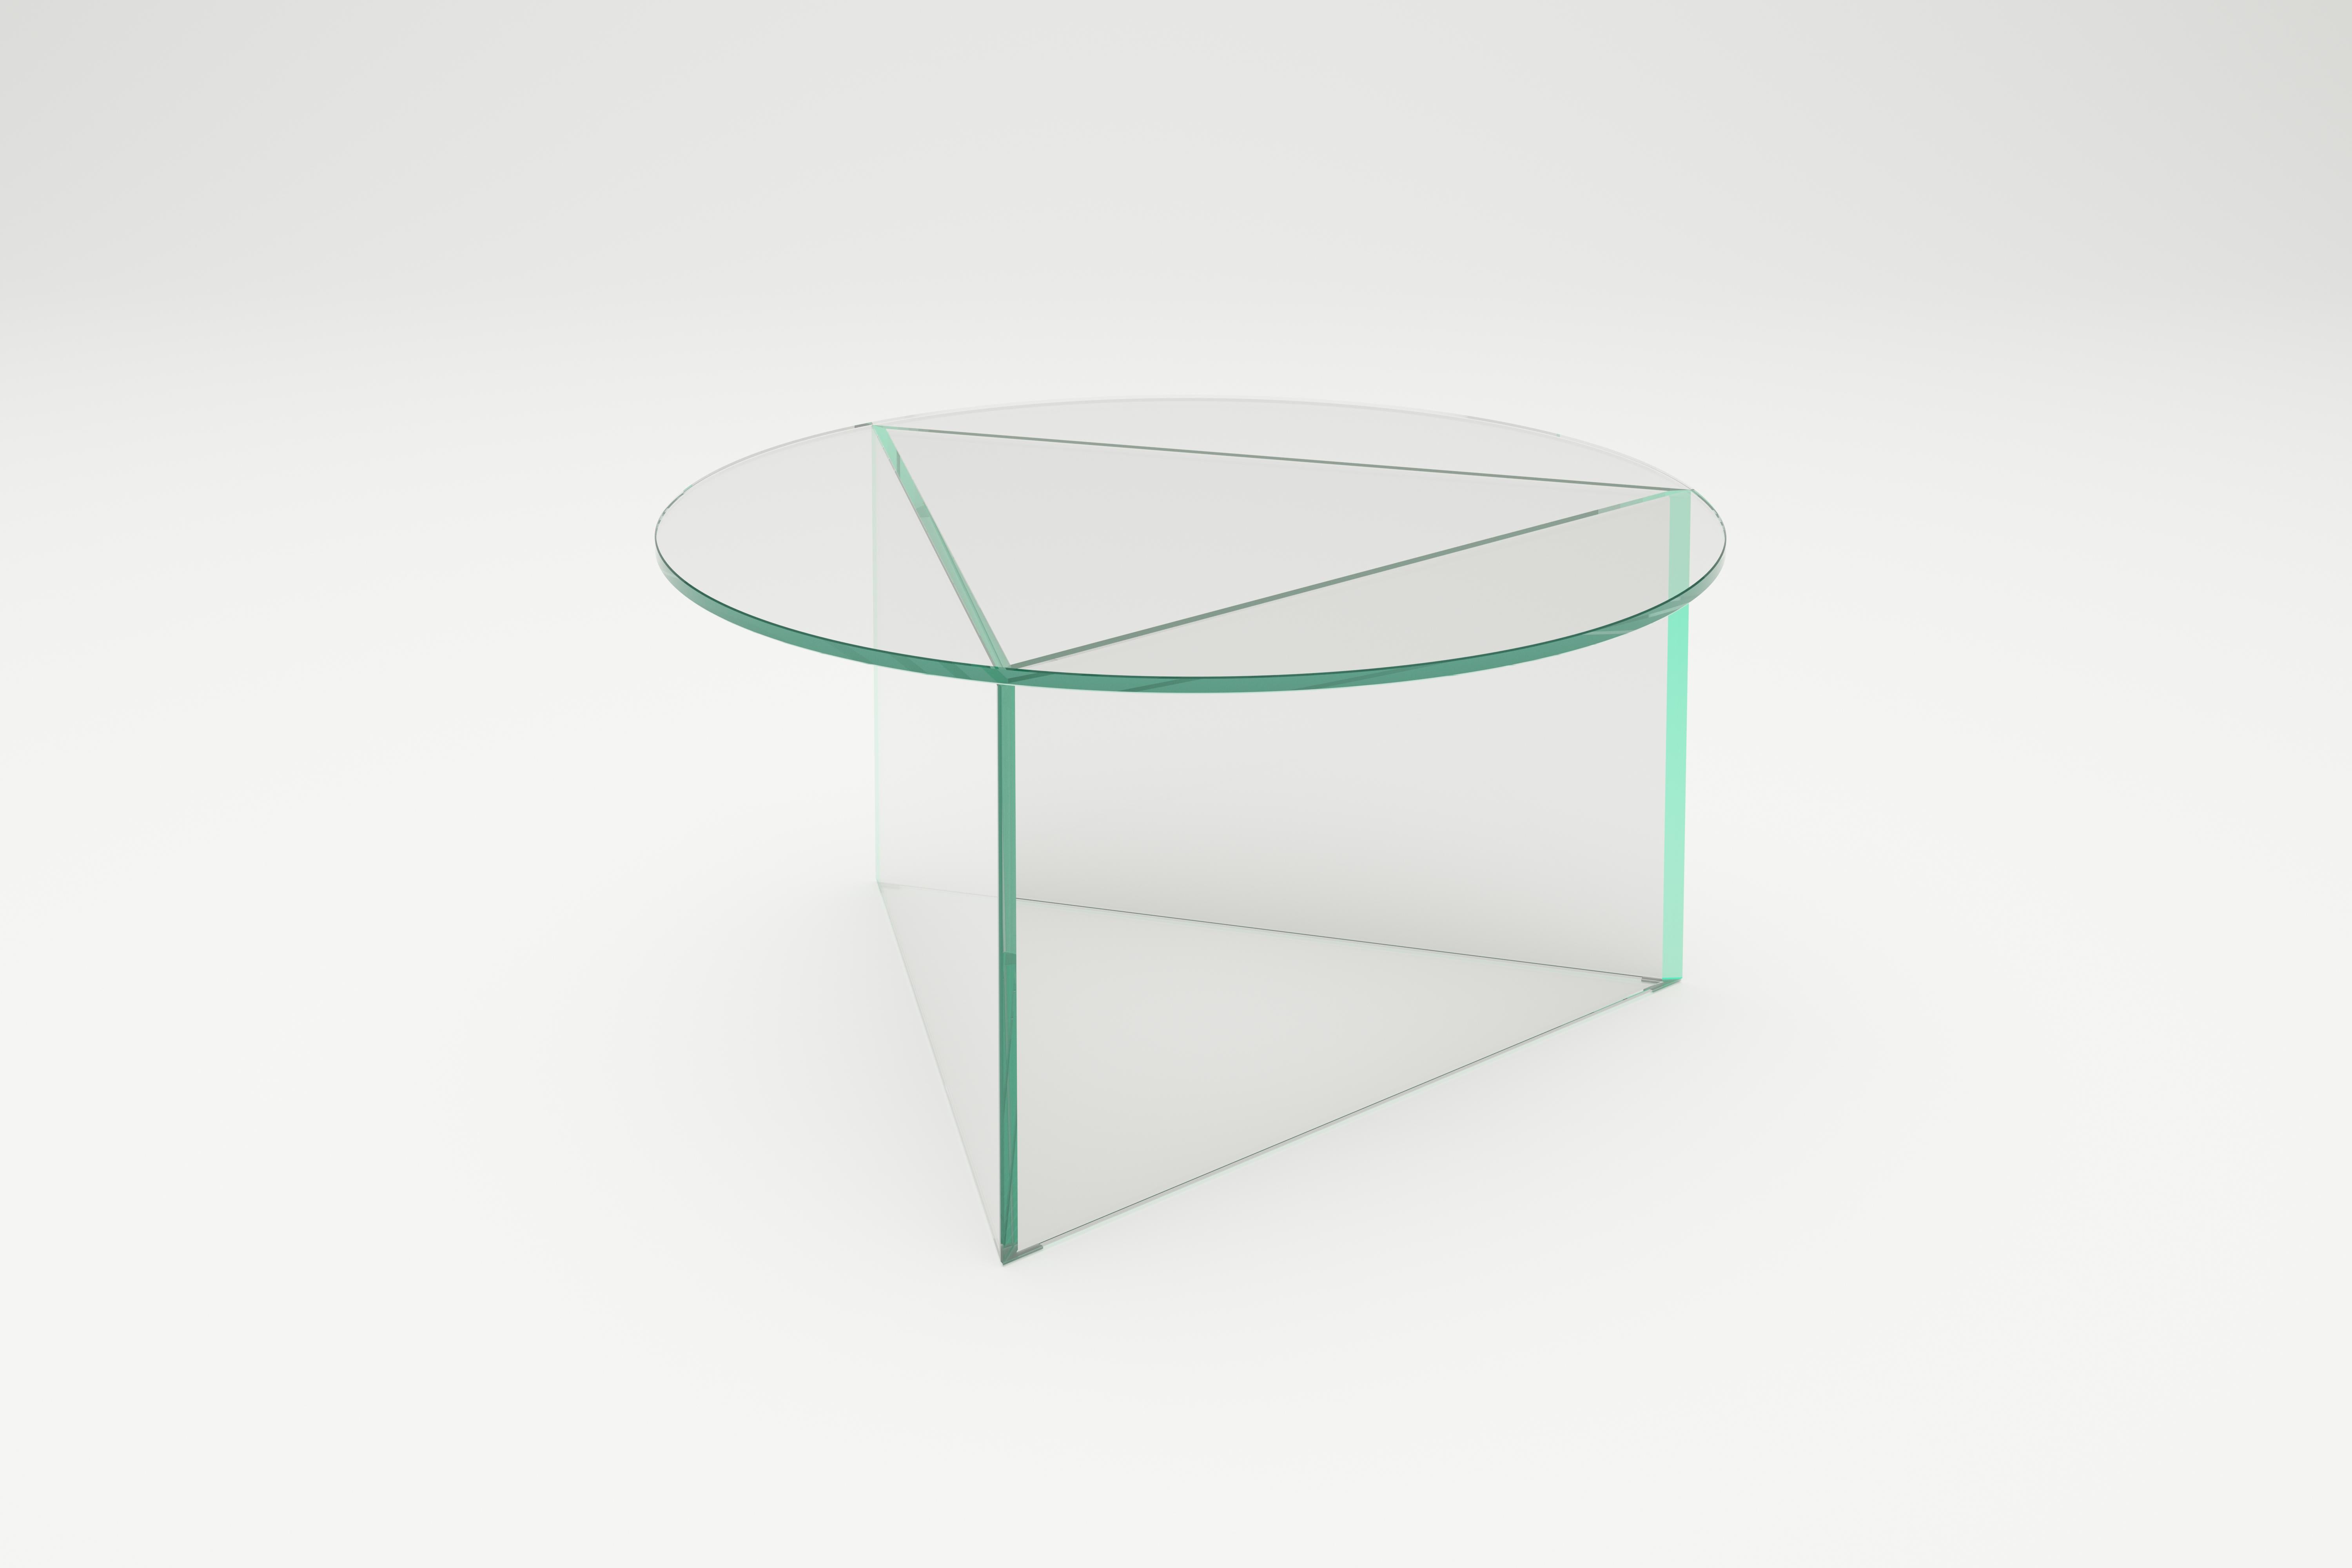 Clear glass prisma circle 70 coffe table by Sebastian Scherer
Dimensions: D70x H35 cm
Materials: Solid coloured glass.
Weight: 24.7 kg.
Also Available: Glass: clear white / clear green / clear blue / clear bronze / clear black / satin white /